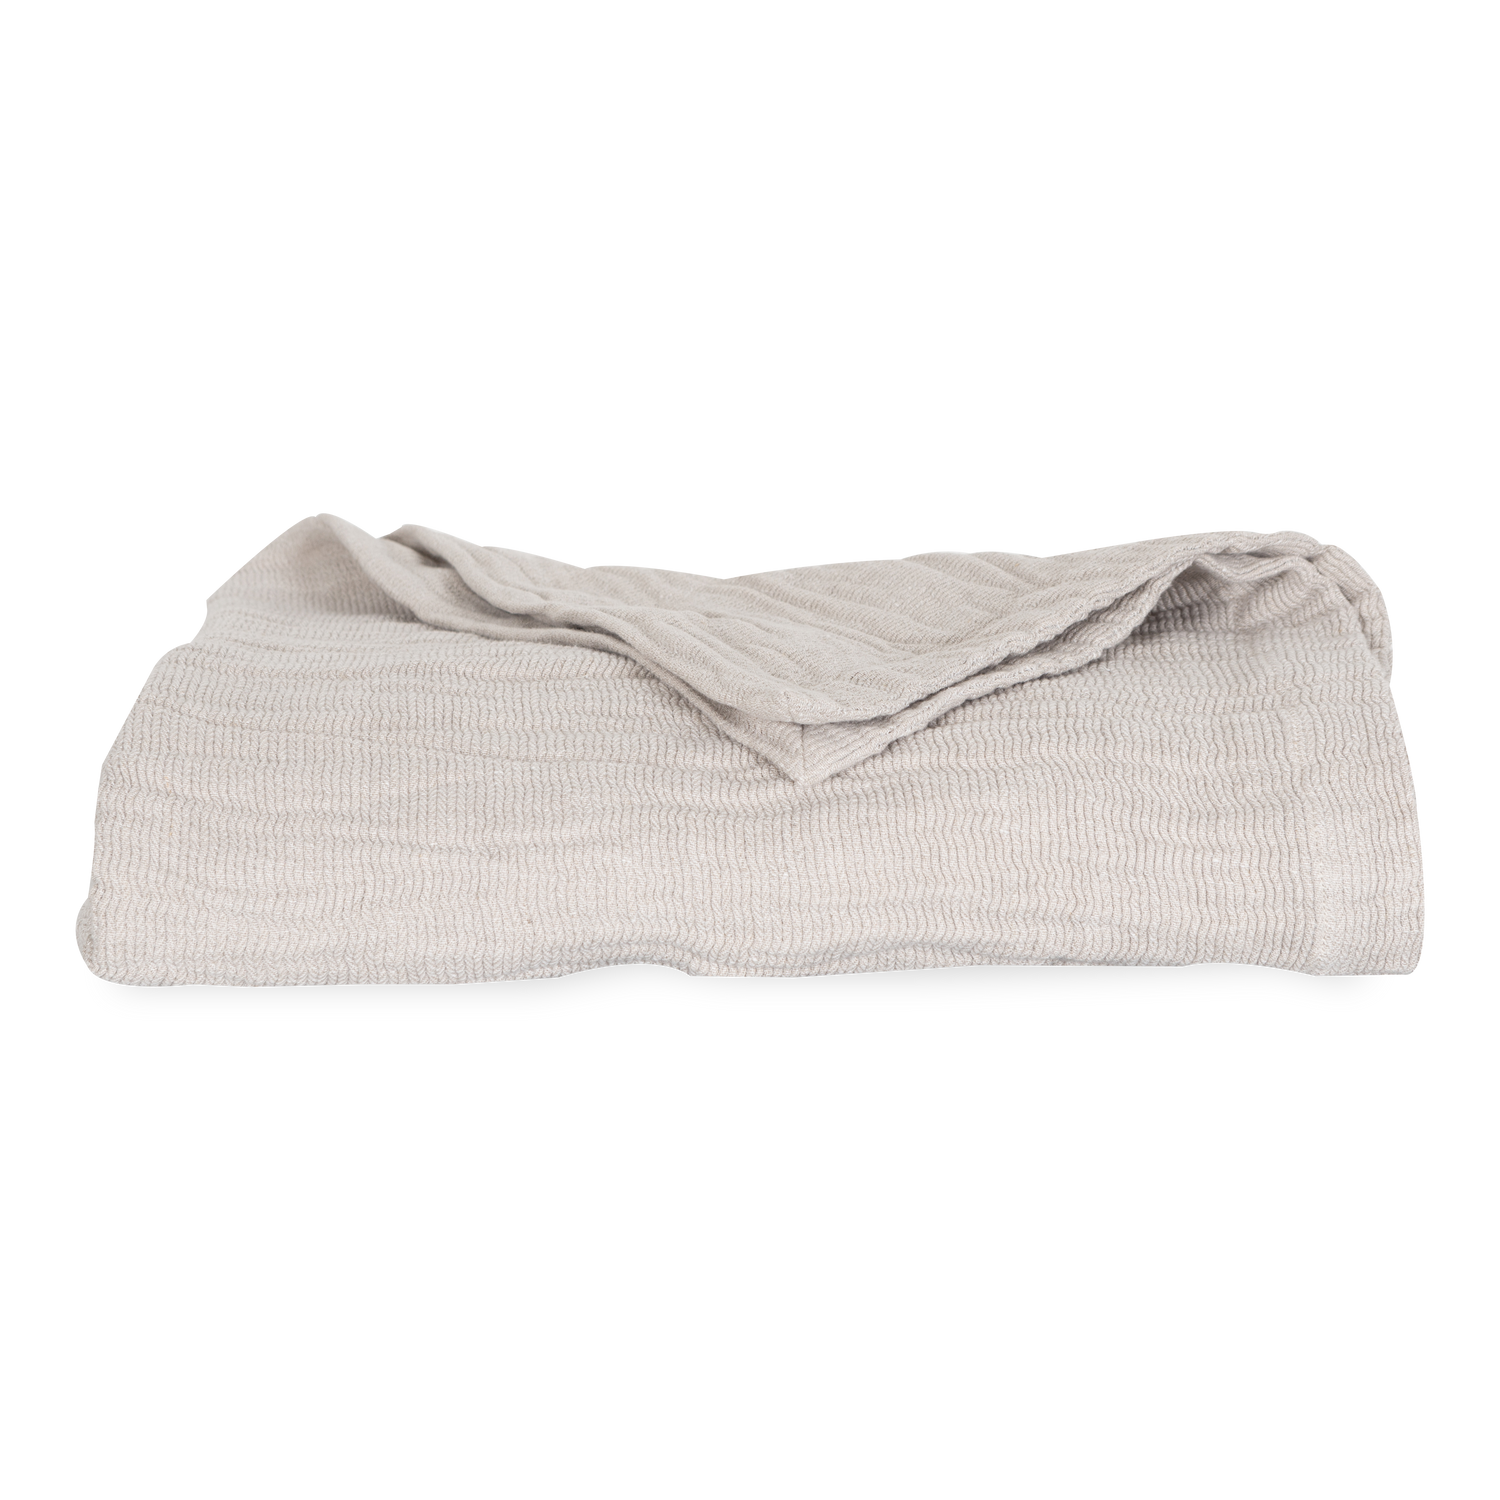 This bed cover is made with linen and features a rippled texture for an elegant drape.